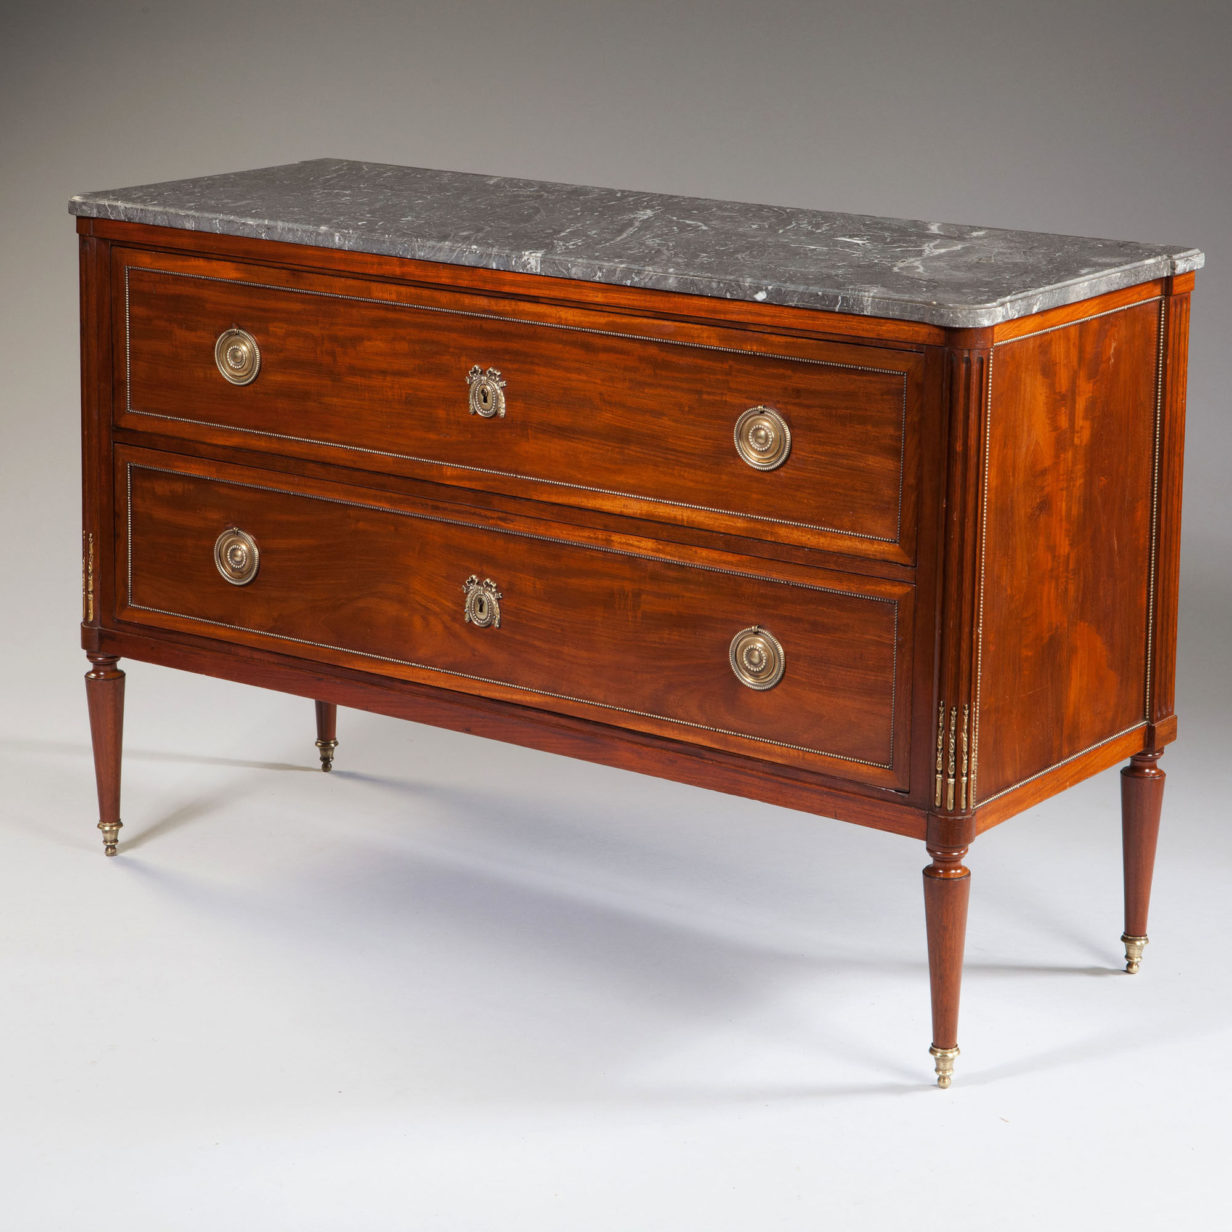 A late 18th century mahogany commode or chest of drawers